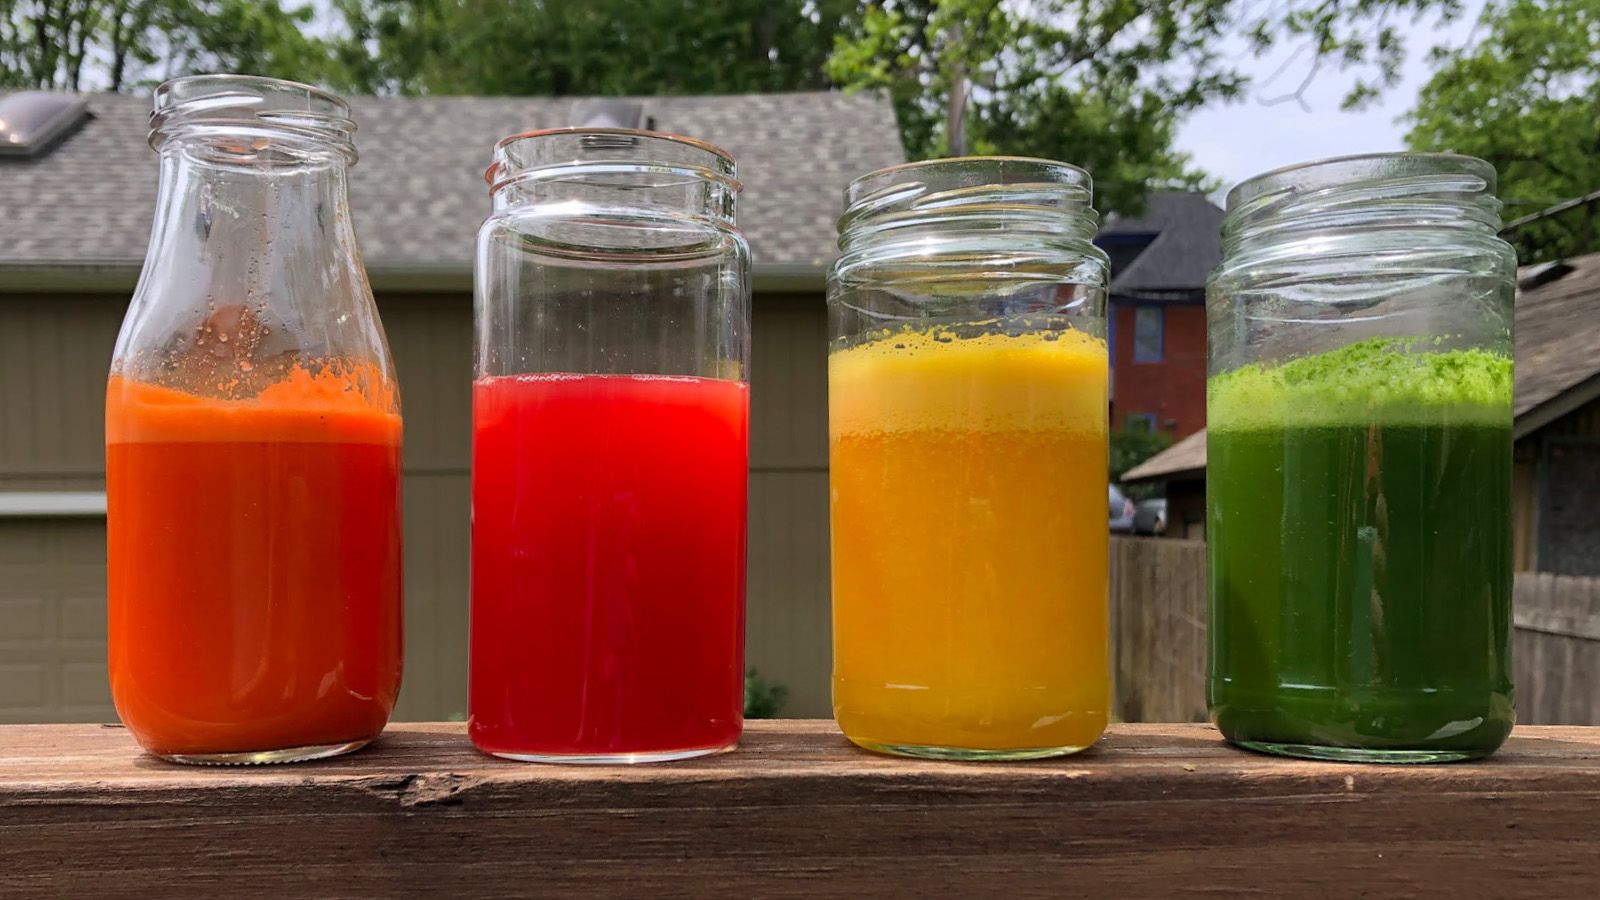 4 jars of freshly squeezed juice, orange, watermelon, carrot and greens, sitting outdoors on a countertop on a sunny day.